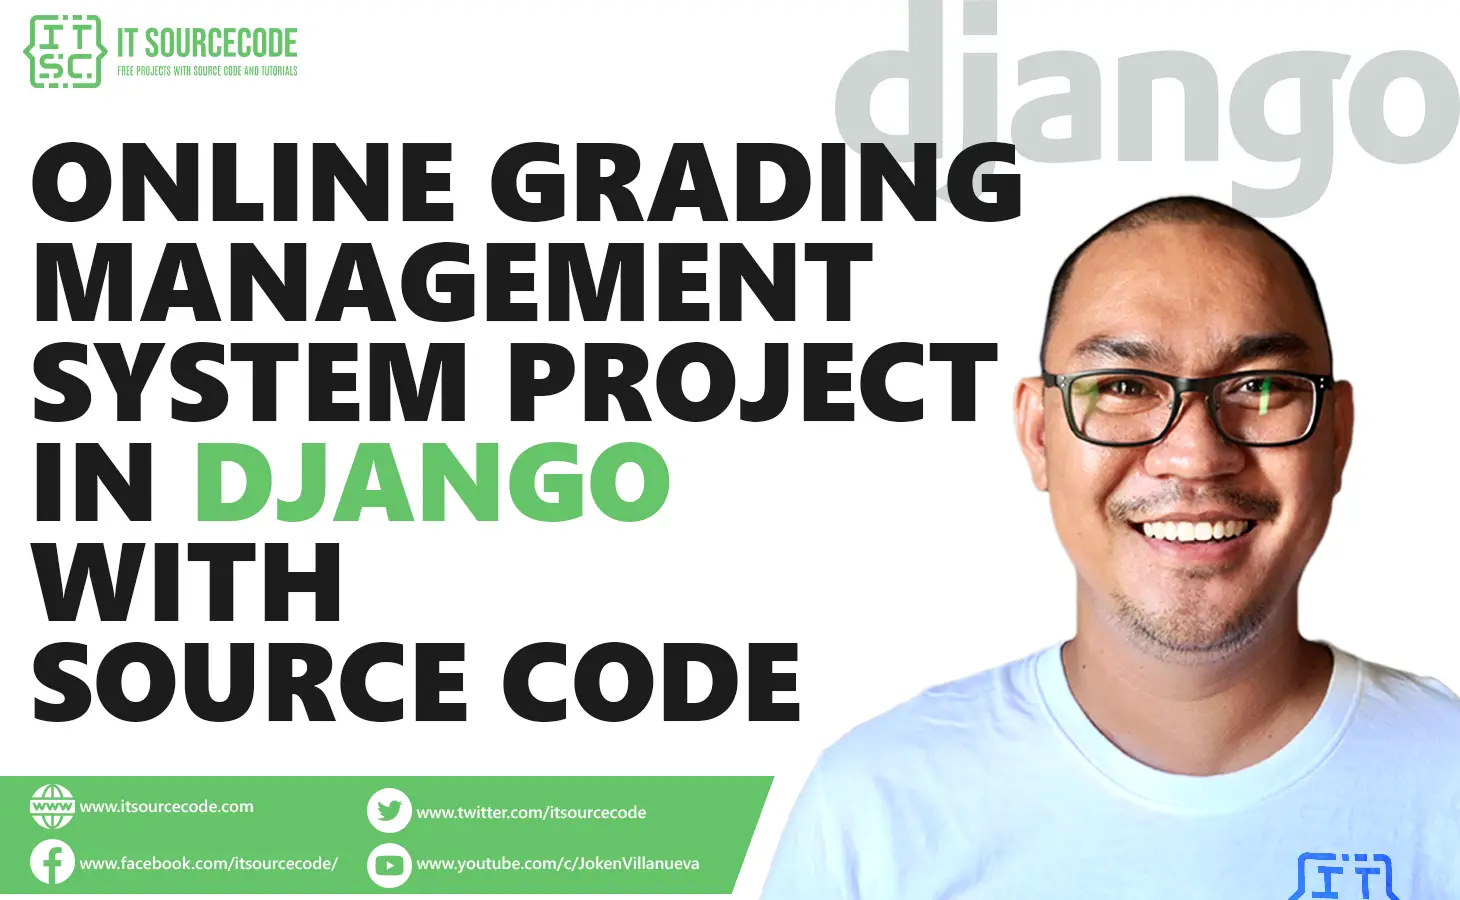 This Online Grading Management System Project in Django created based on python, Django, and SQLITE3 Database. The Grading System is a web-b